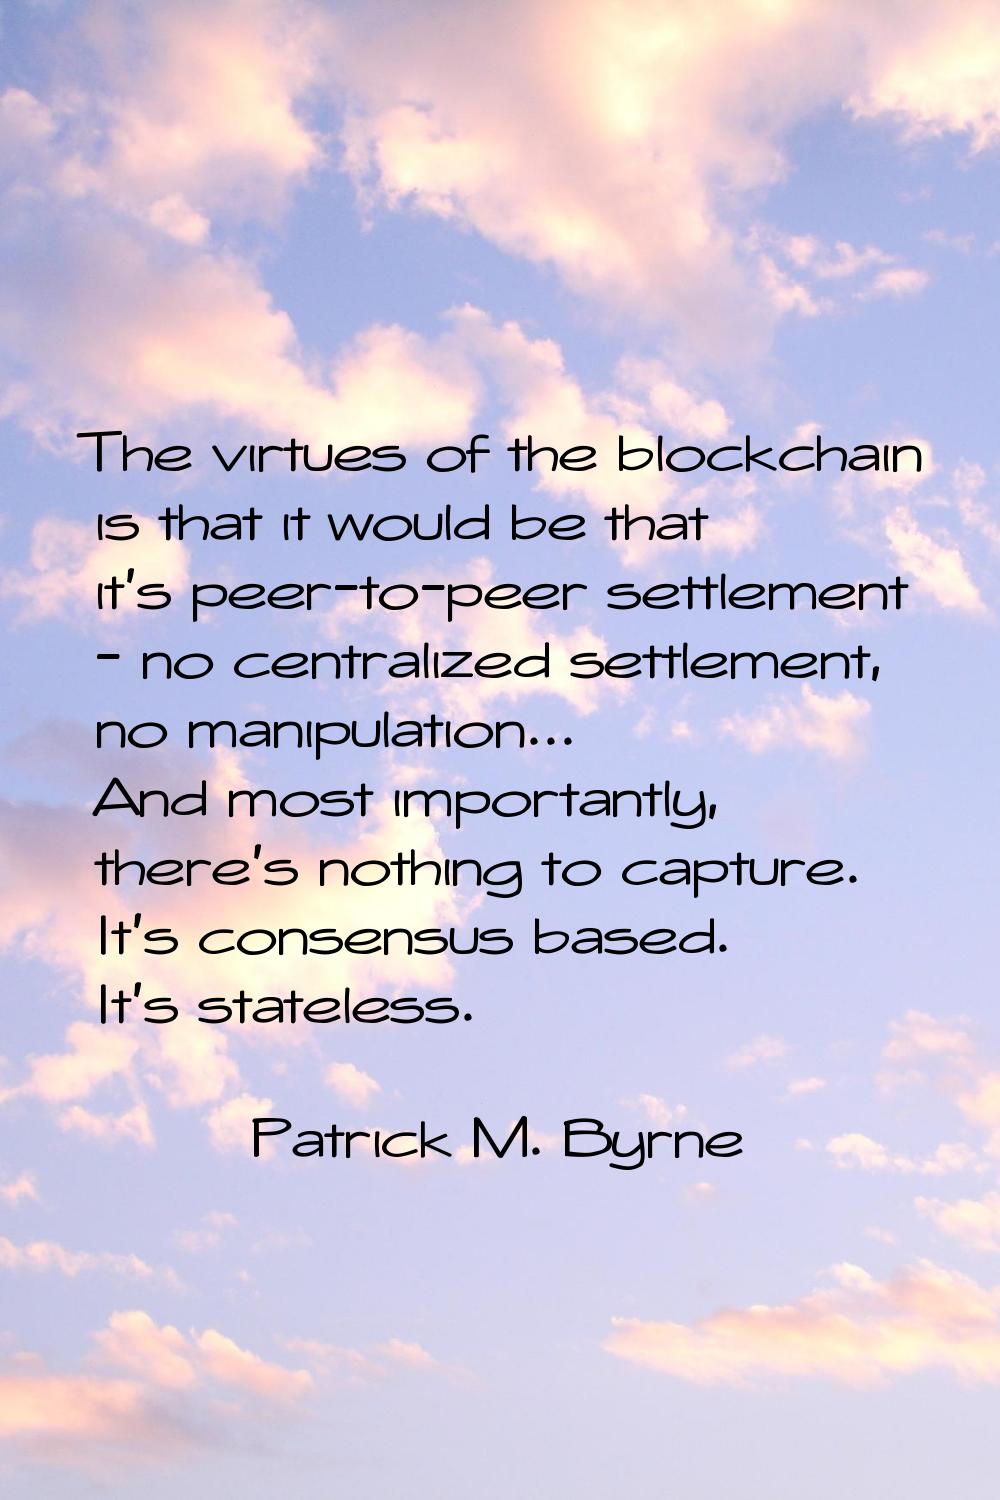 The virtues of the blockchain is that it would be that it's peer-to-peer settlement - no centralize